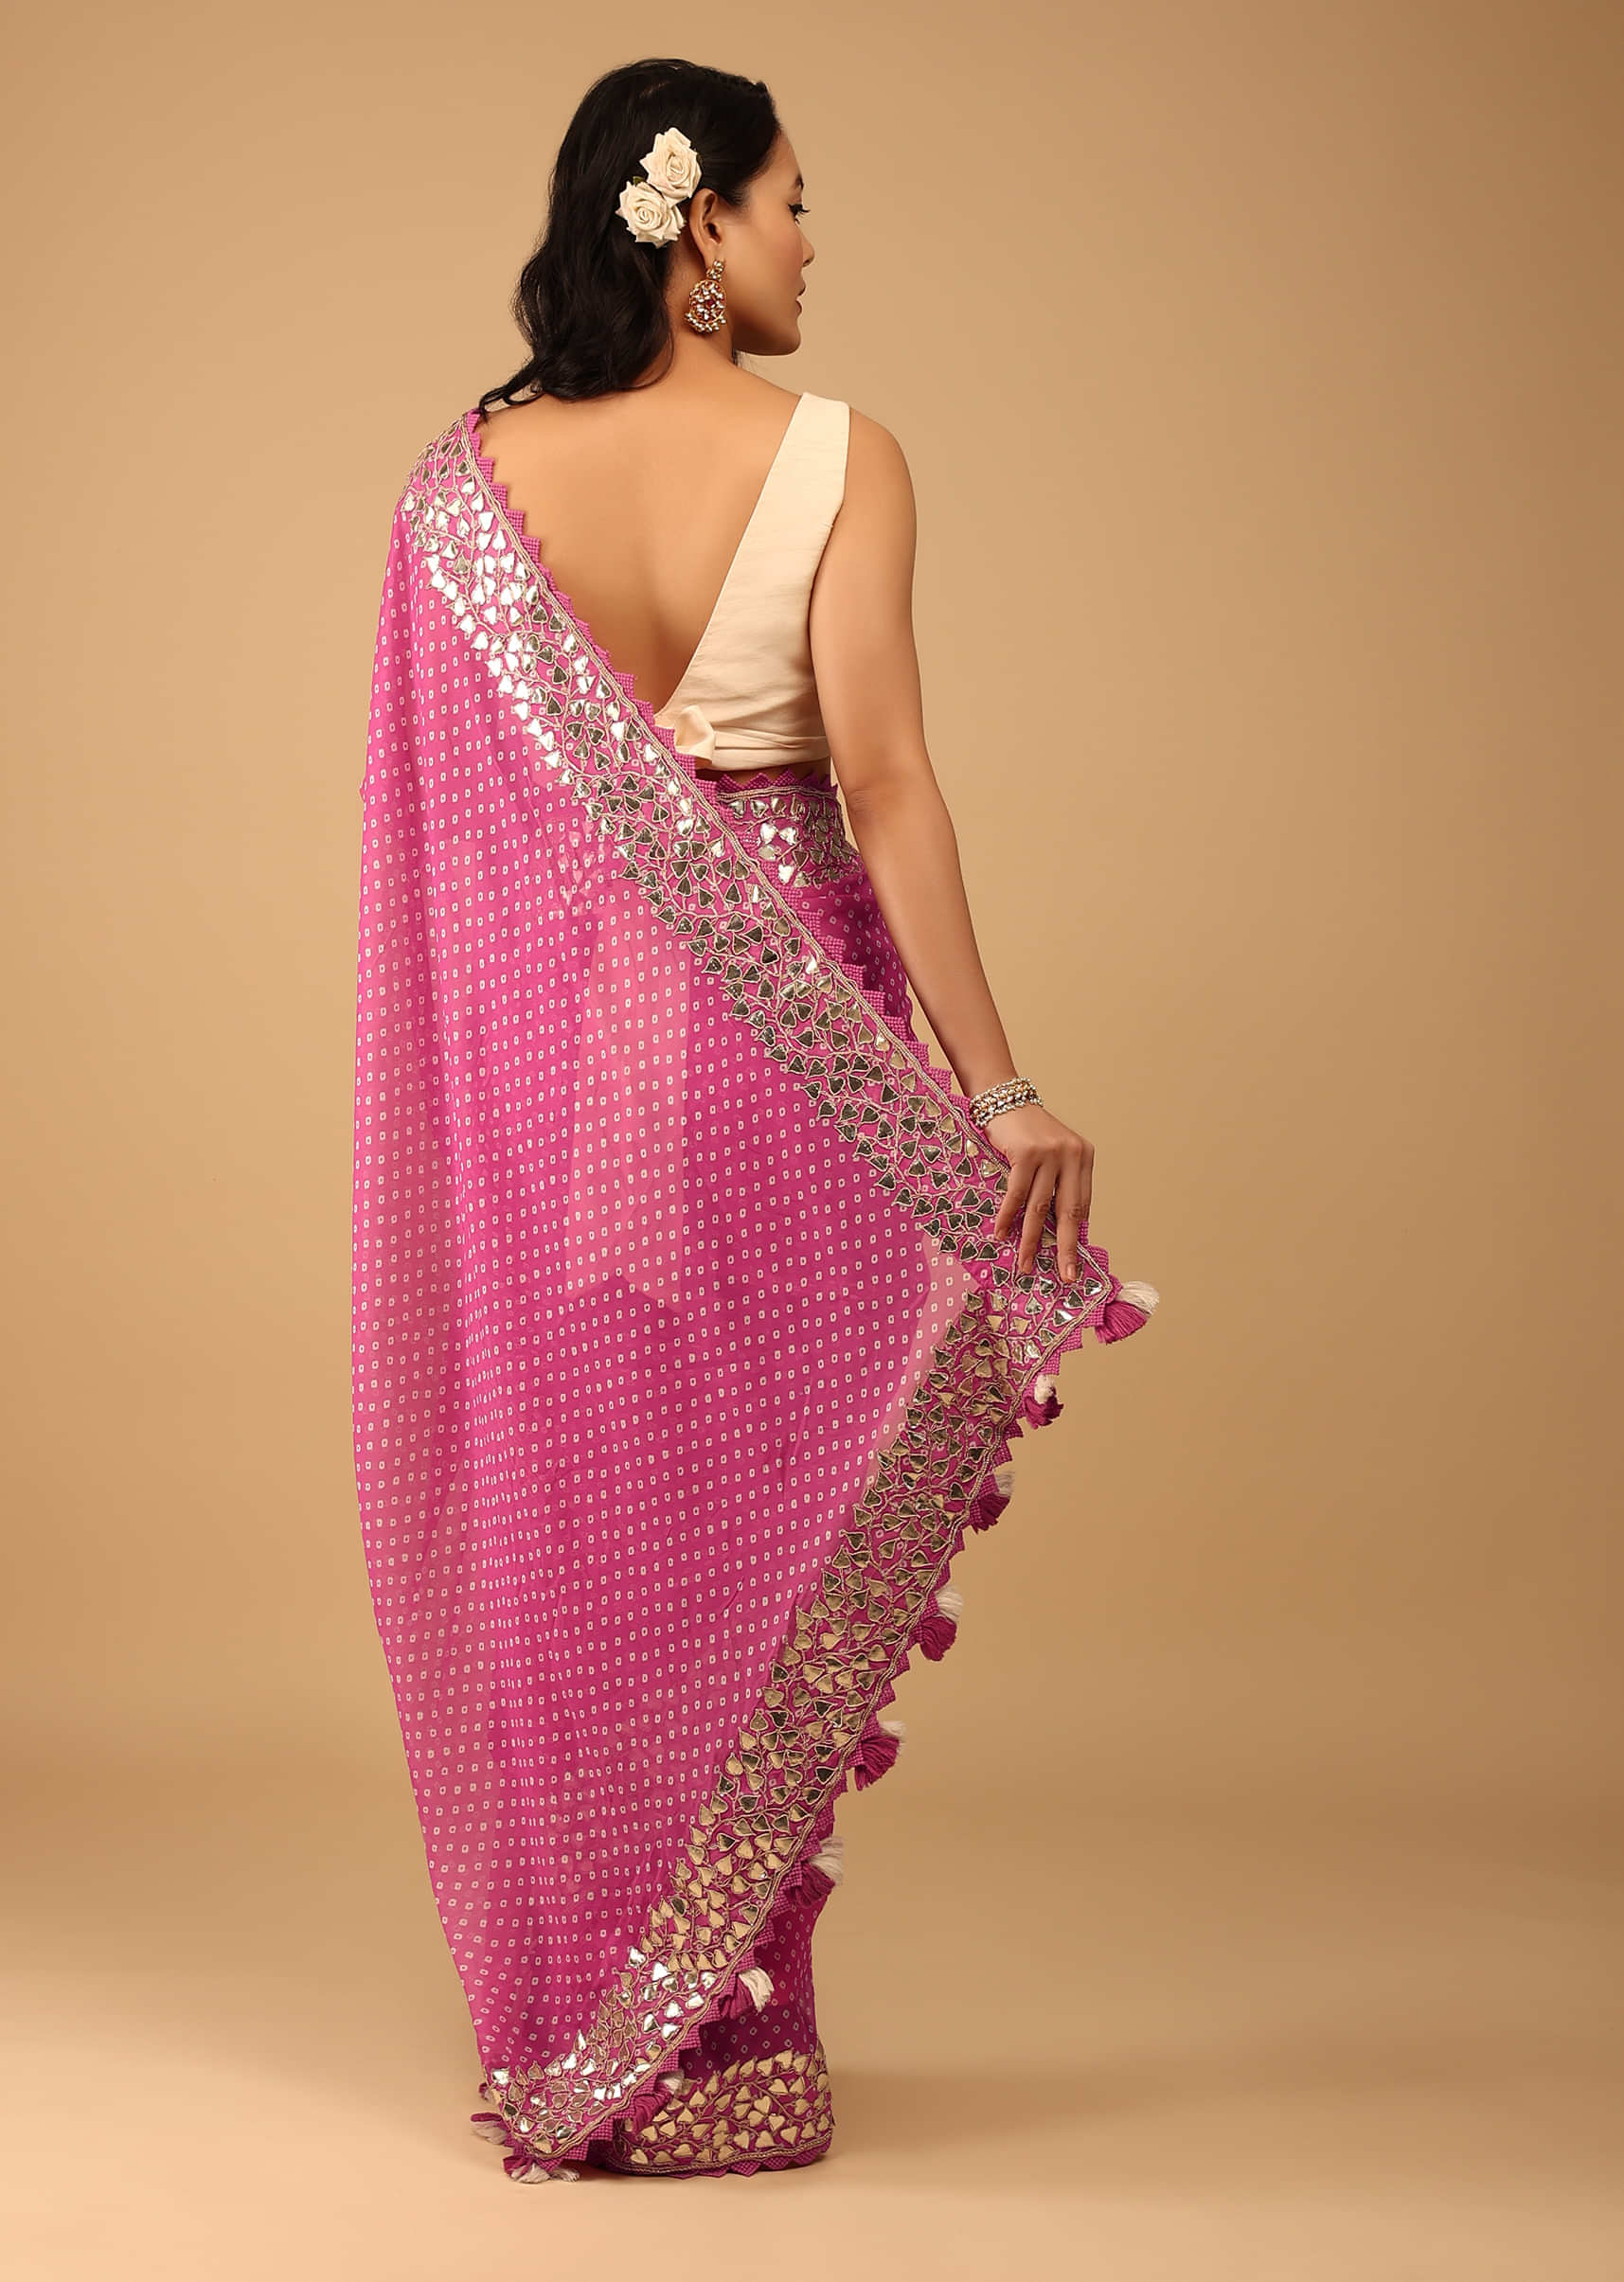 Azalea Pink Bandhani Saree In Georgette With Embroidery